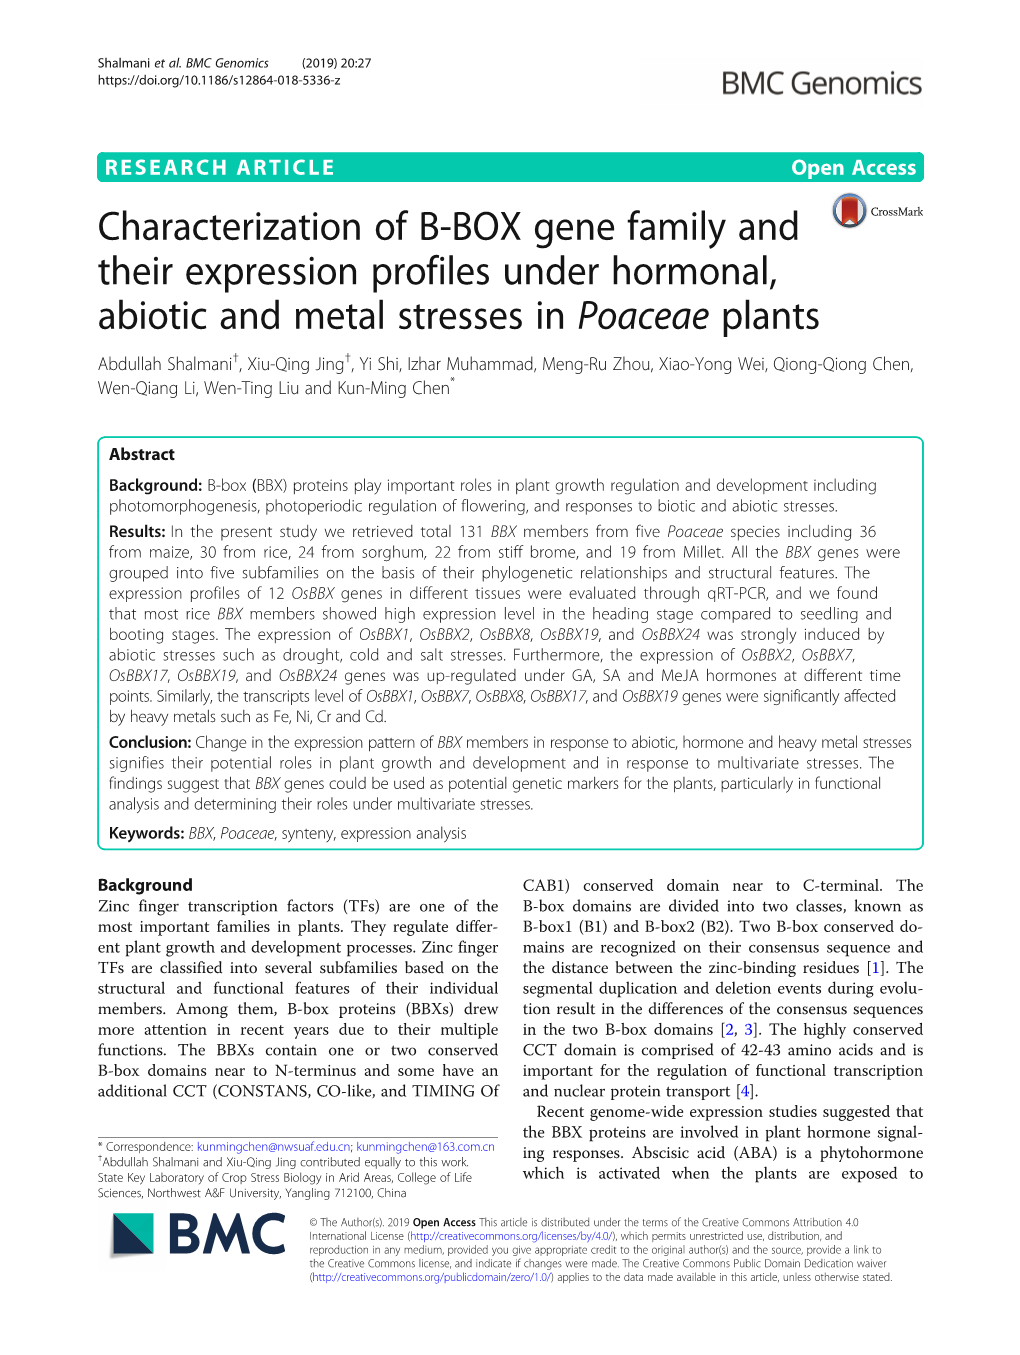 Characterization of B-BOX Gene Family and Their Expression Profiles Under Hormonal, Abiotic and Metal Stresses in Poaceae Plants